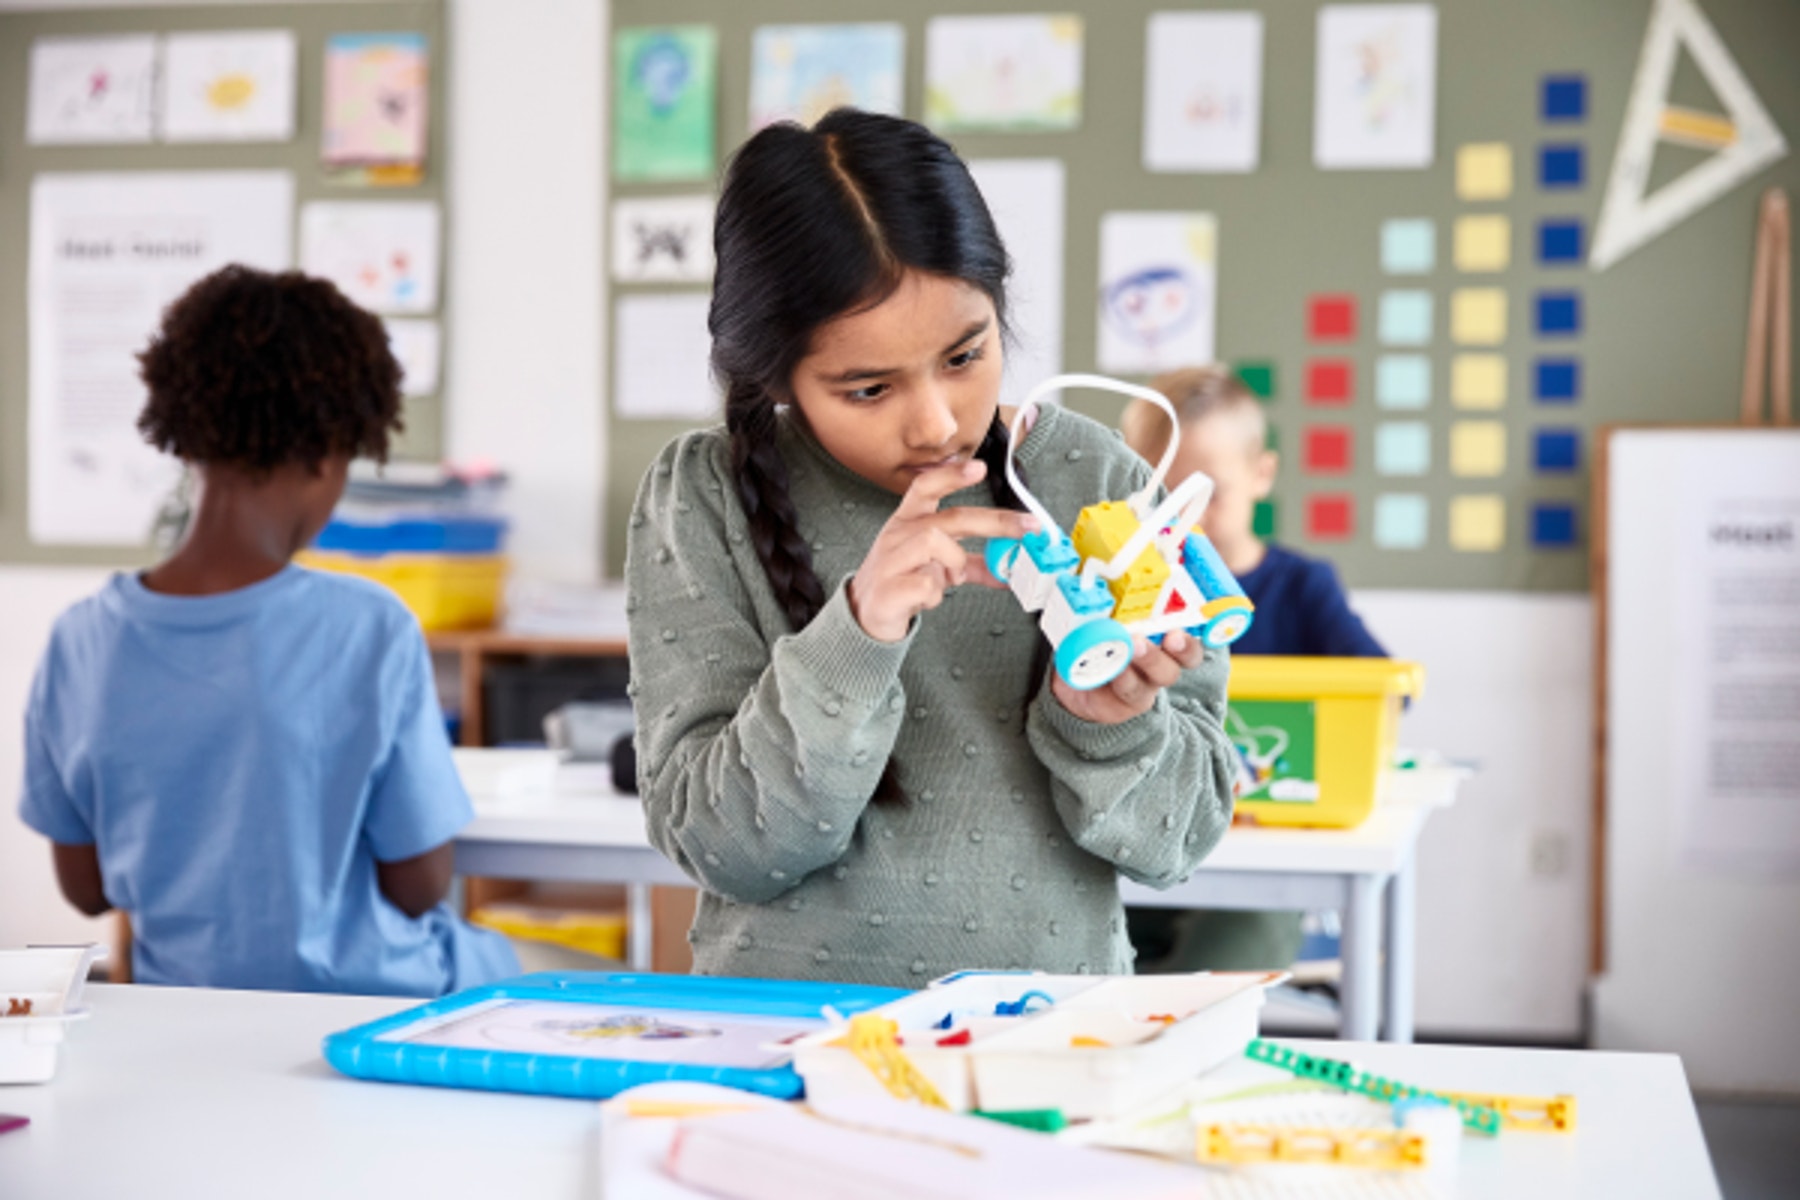 The LEGO Group Announces $1 Million in Grants to Support Children - RVAHub